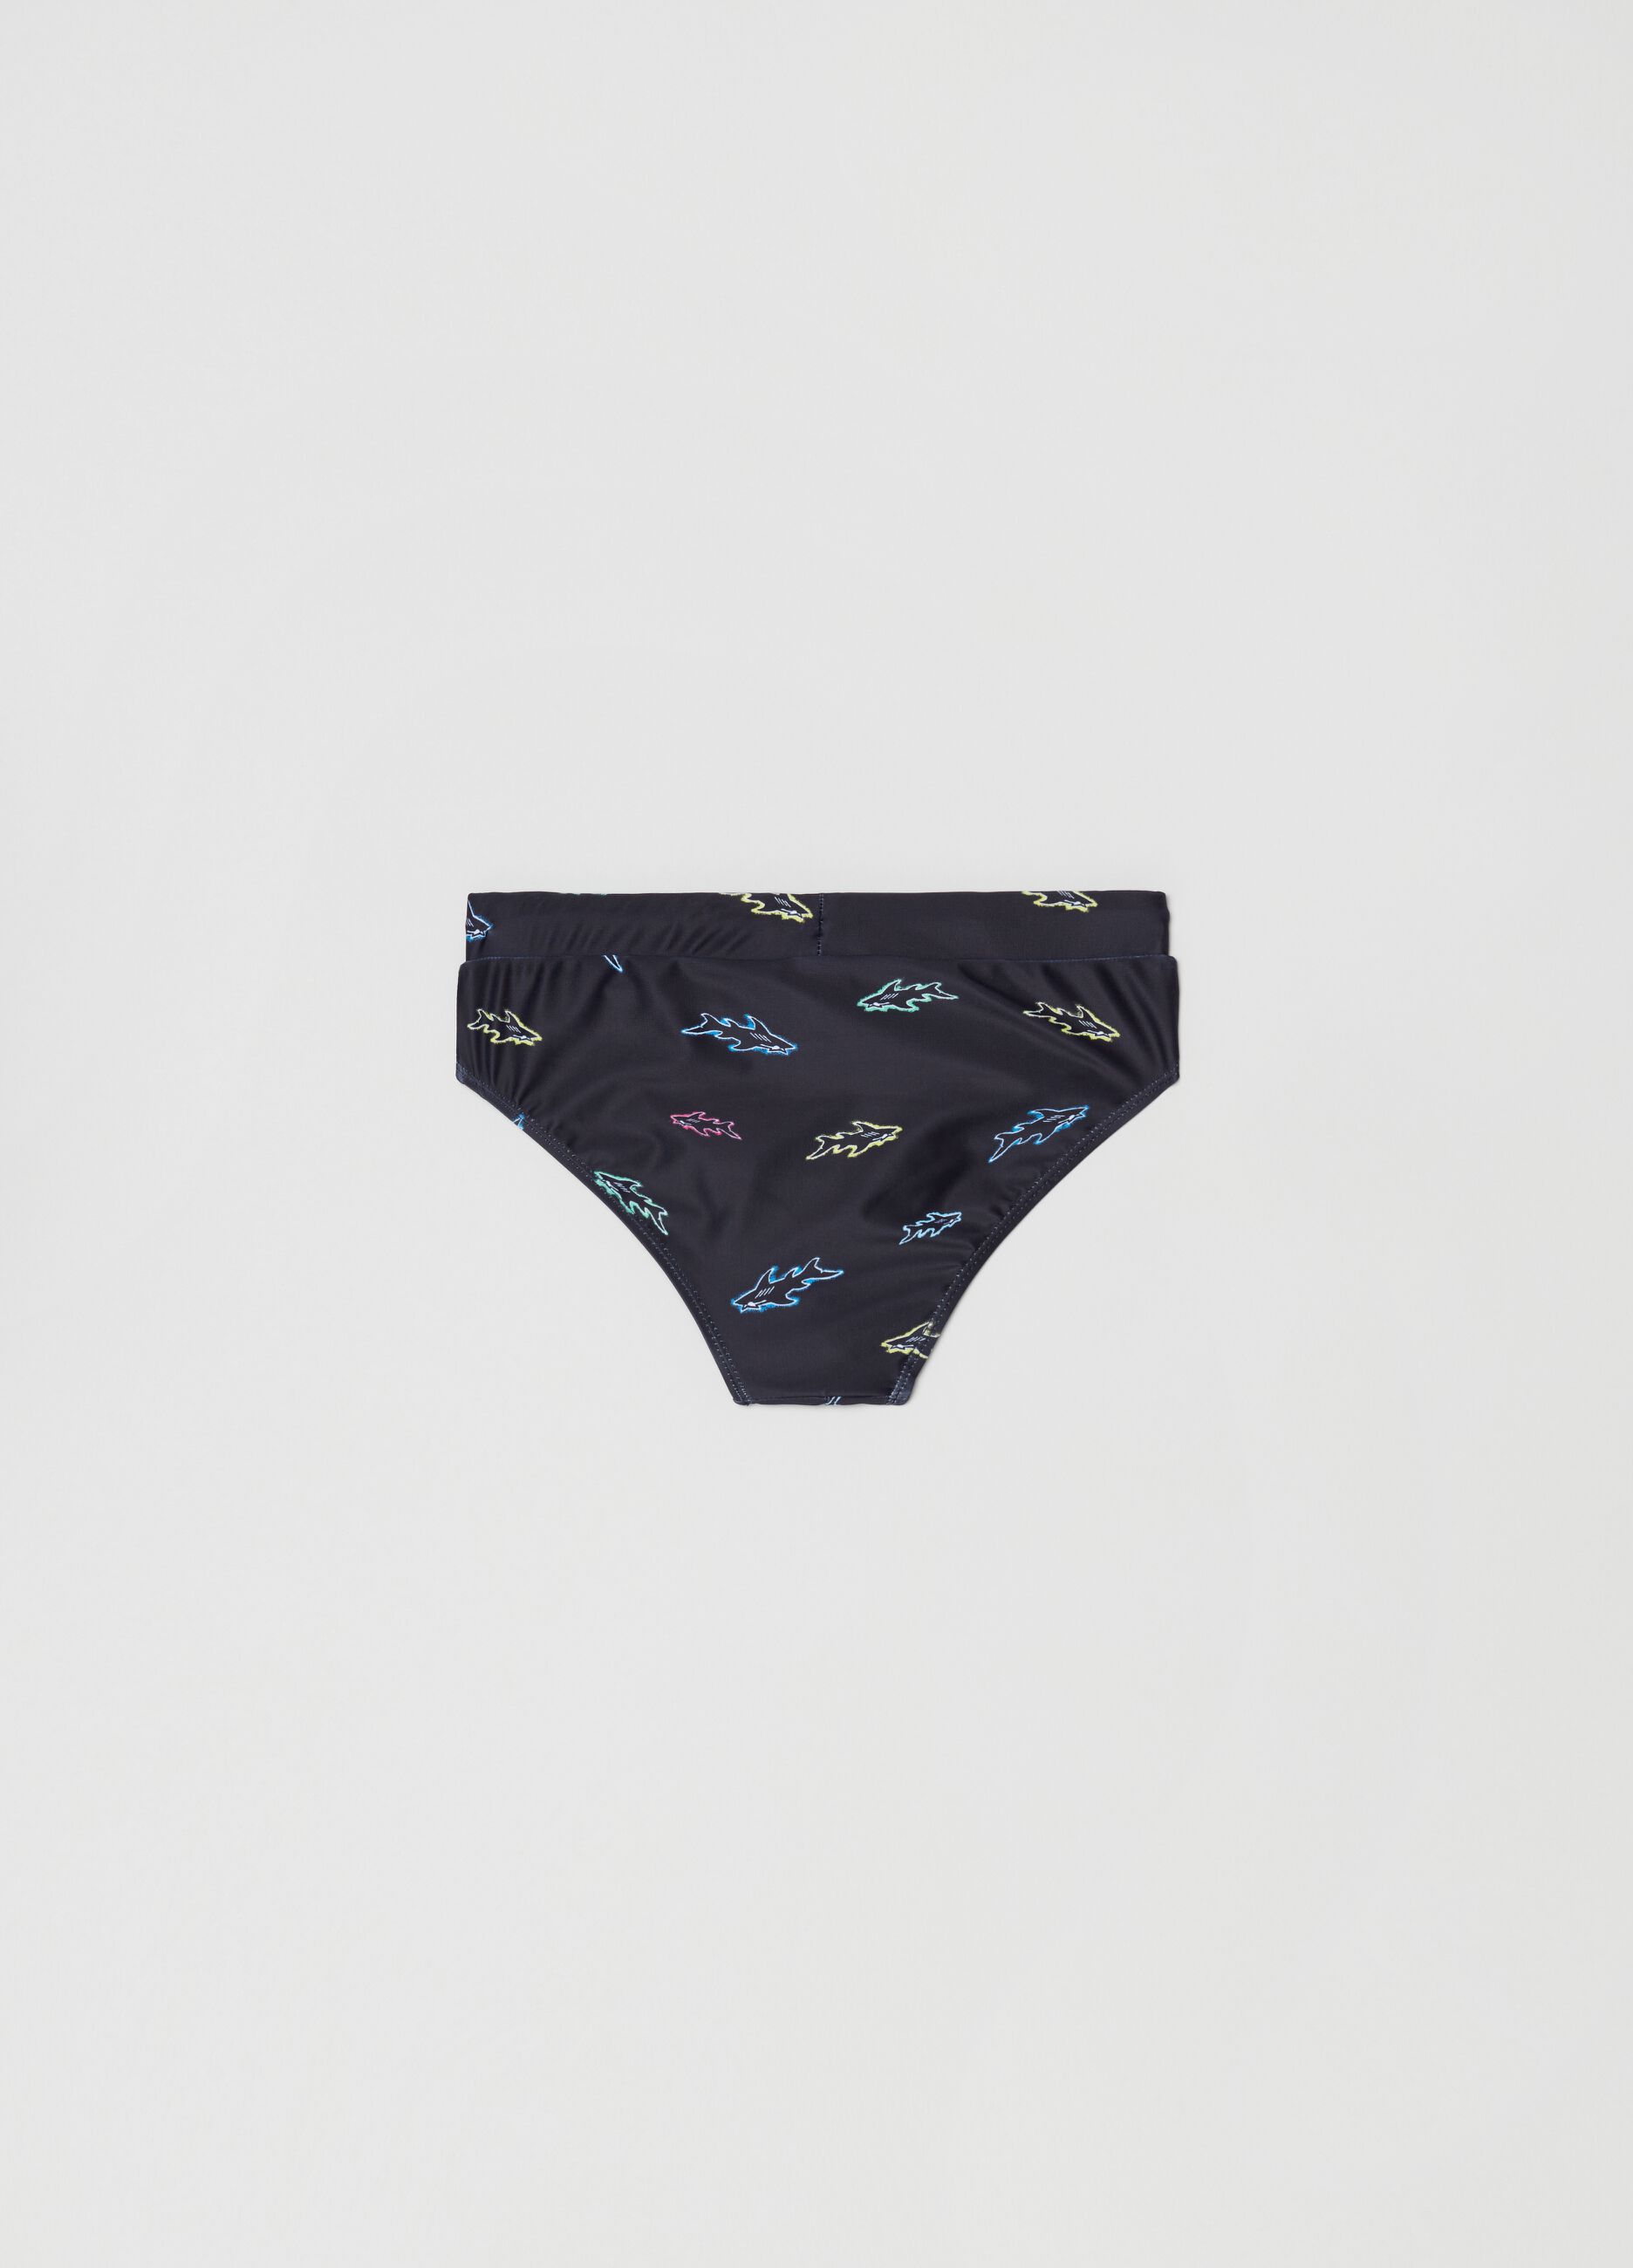 Maui and Sons swim briefs with sharks print